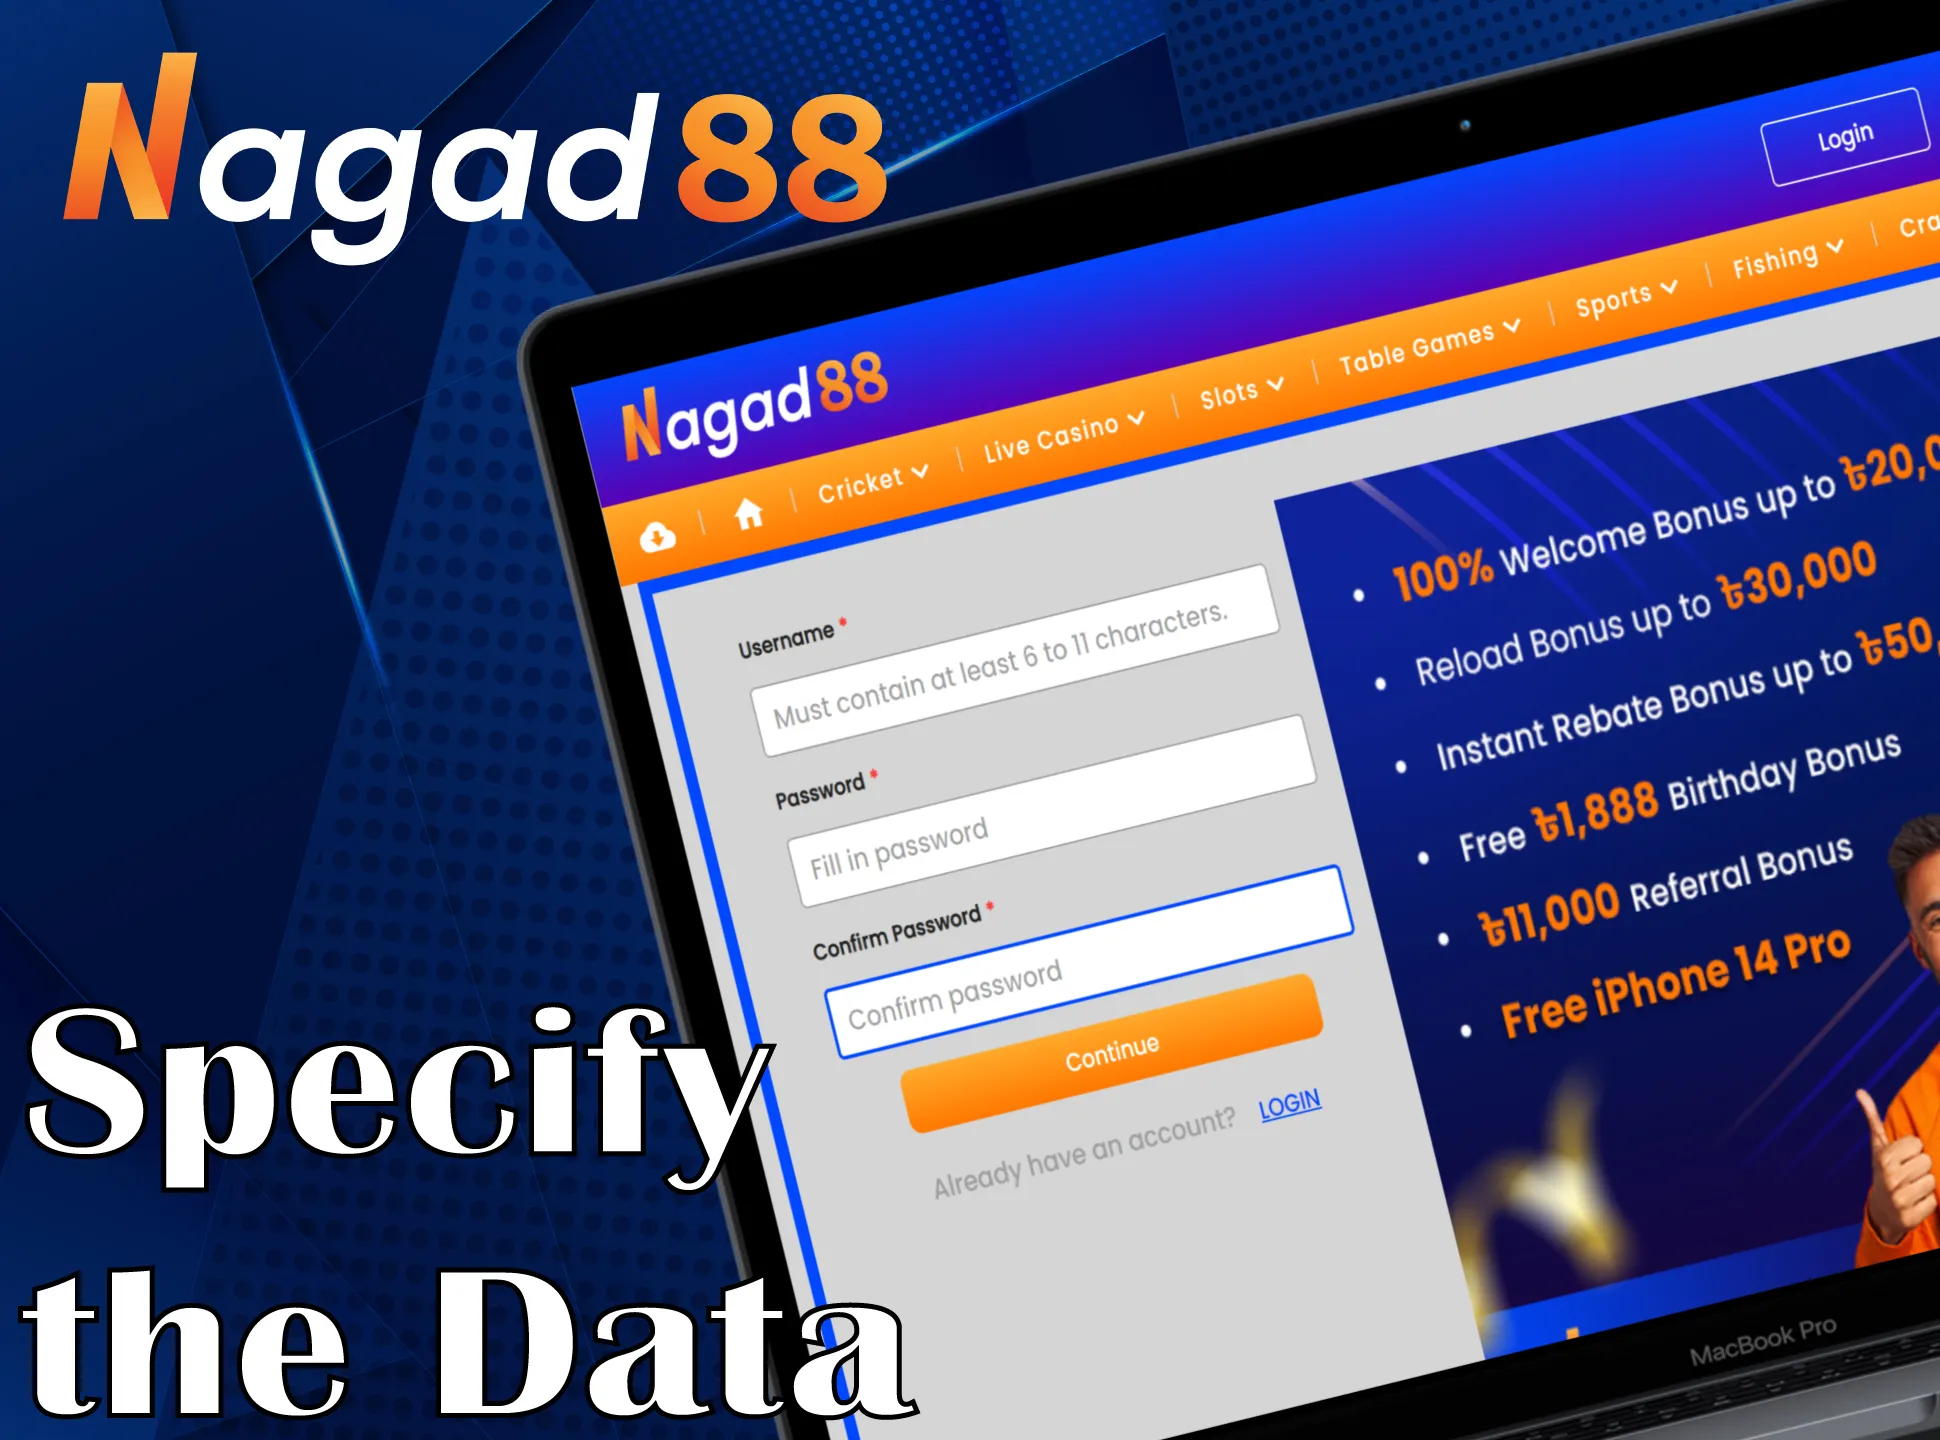 Fill out the data in the Nagad88 registration form.